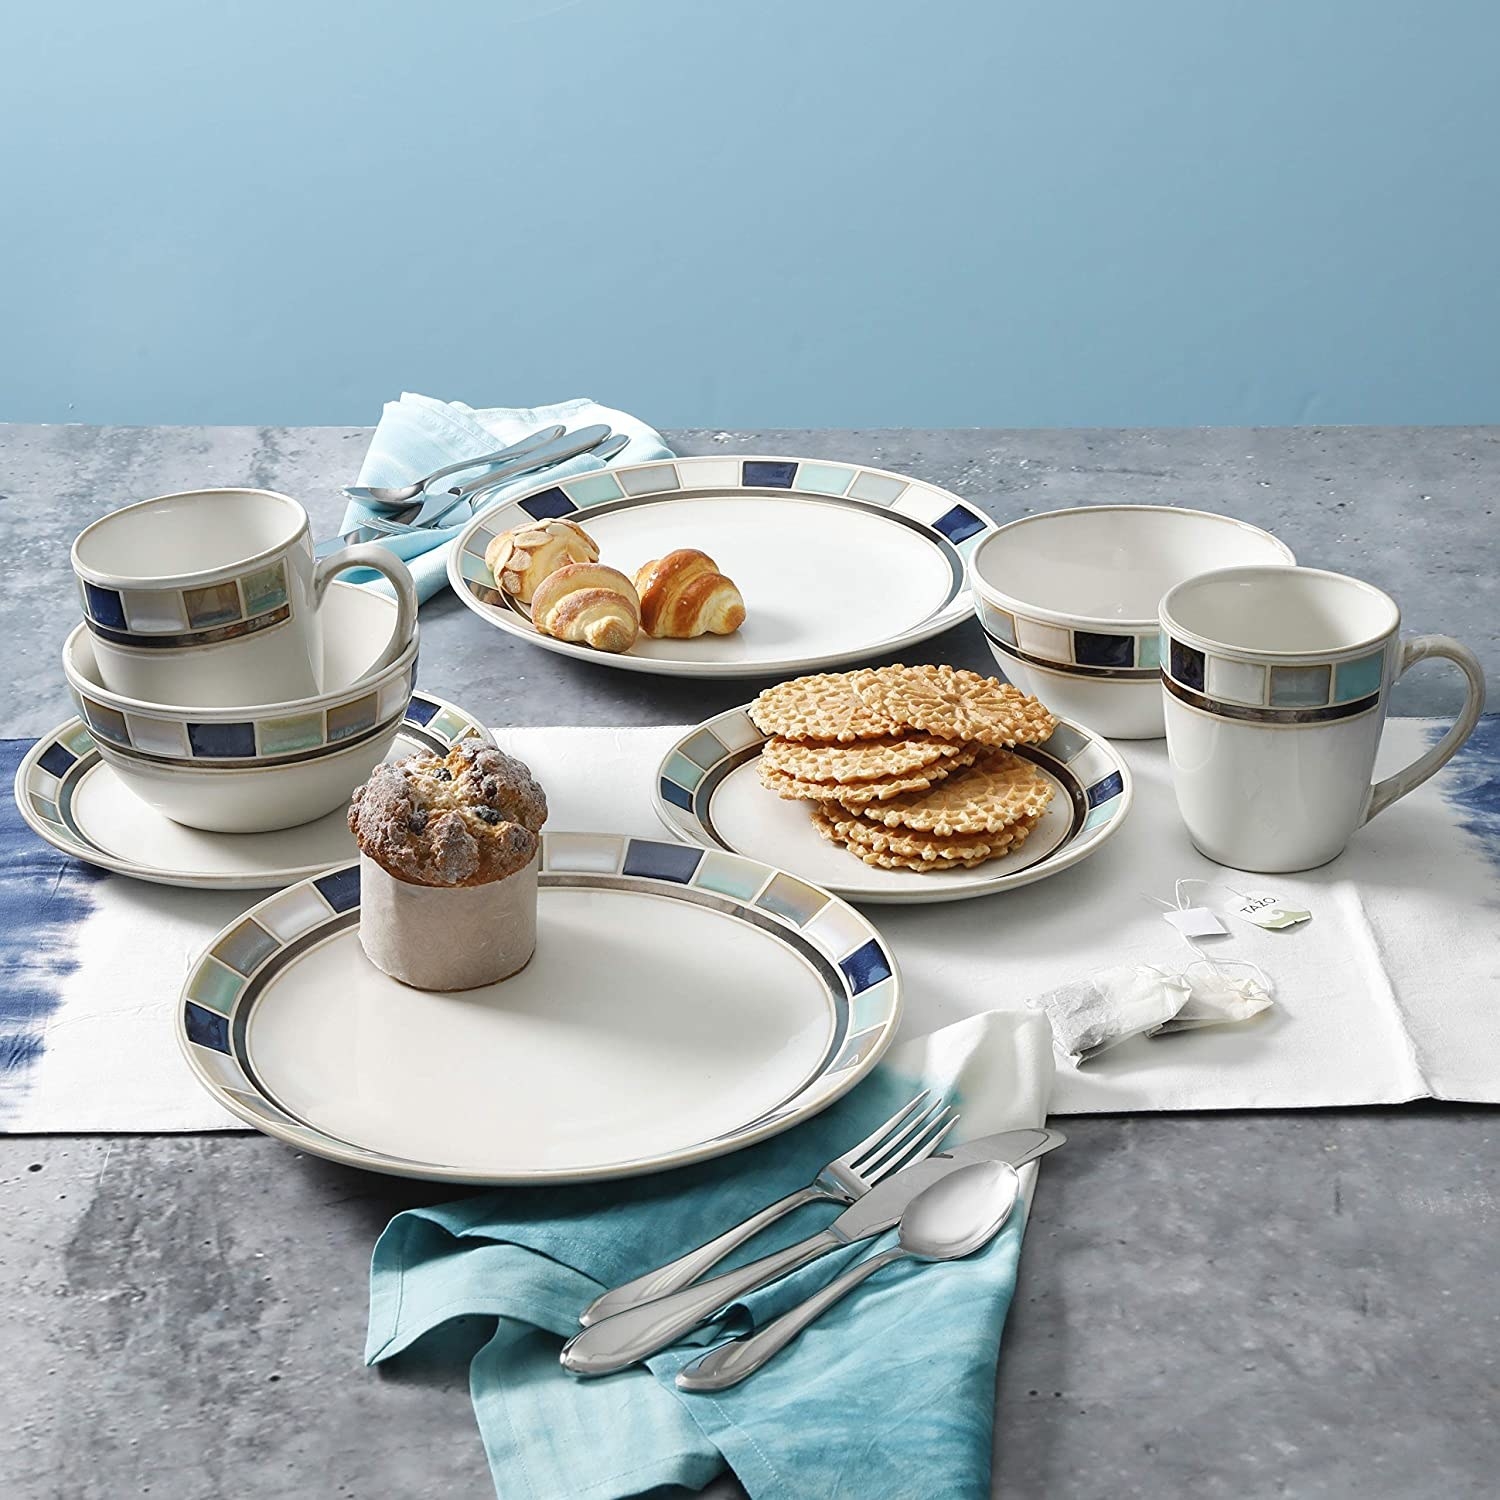 the white and blue Gibson Elite Casa Blanca Round Reactive Glaze Stoneware laid out on a table with biscuits and croissants on the plates